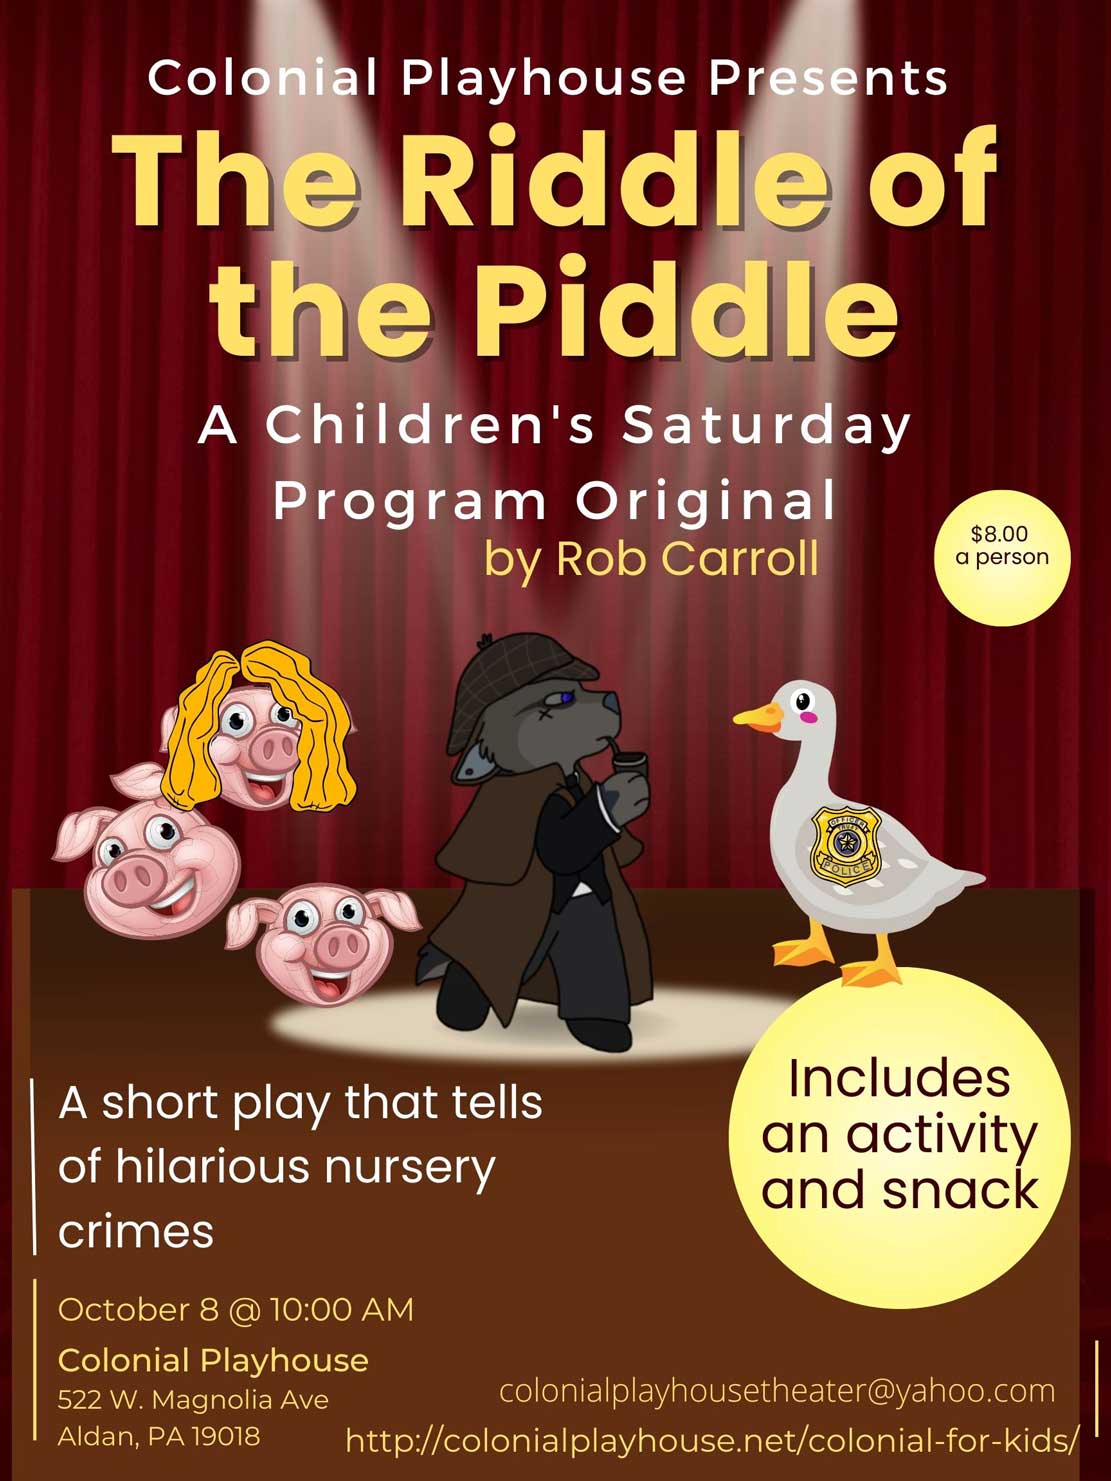 The Riddle of the Piddle